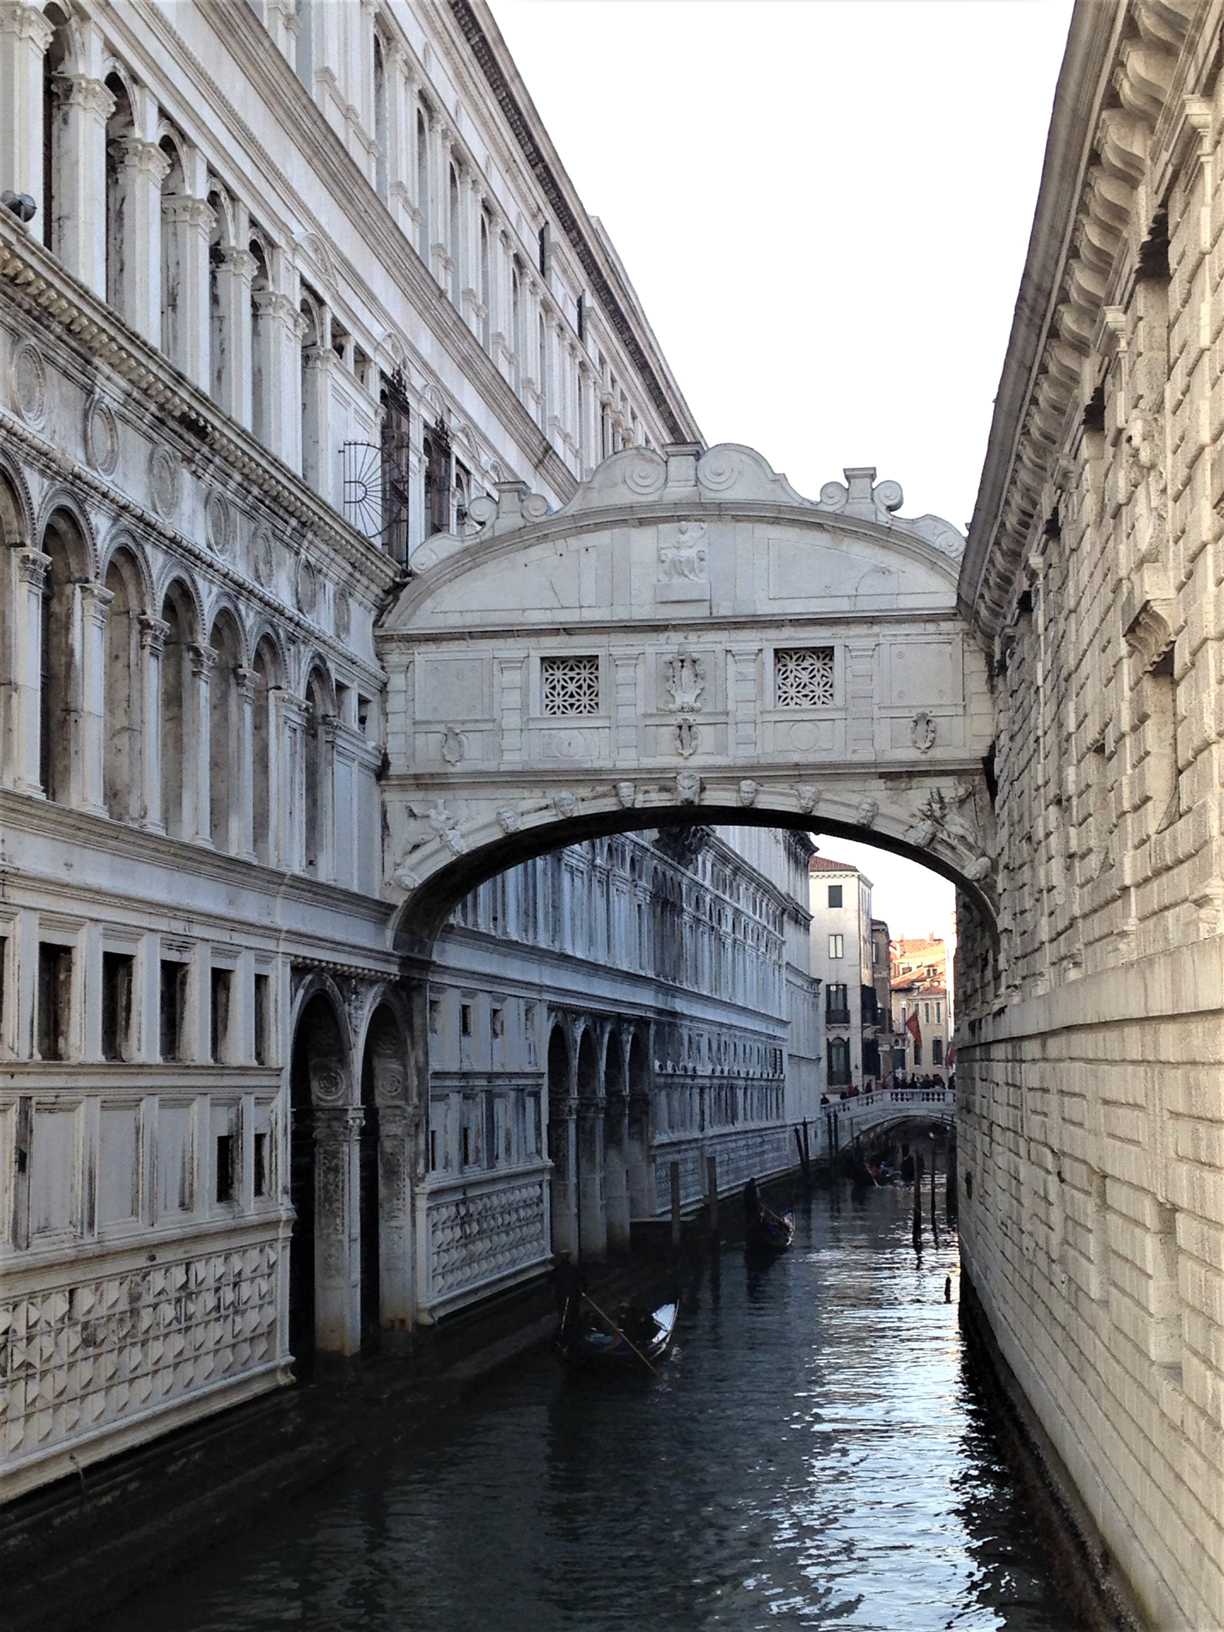 The Bridge of Sighs in Venice, Italy.